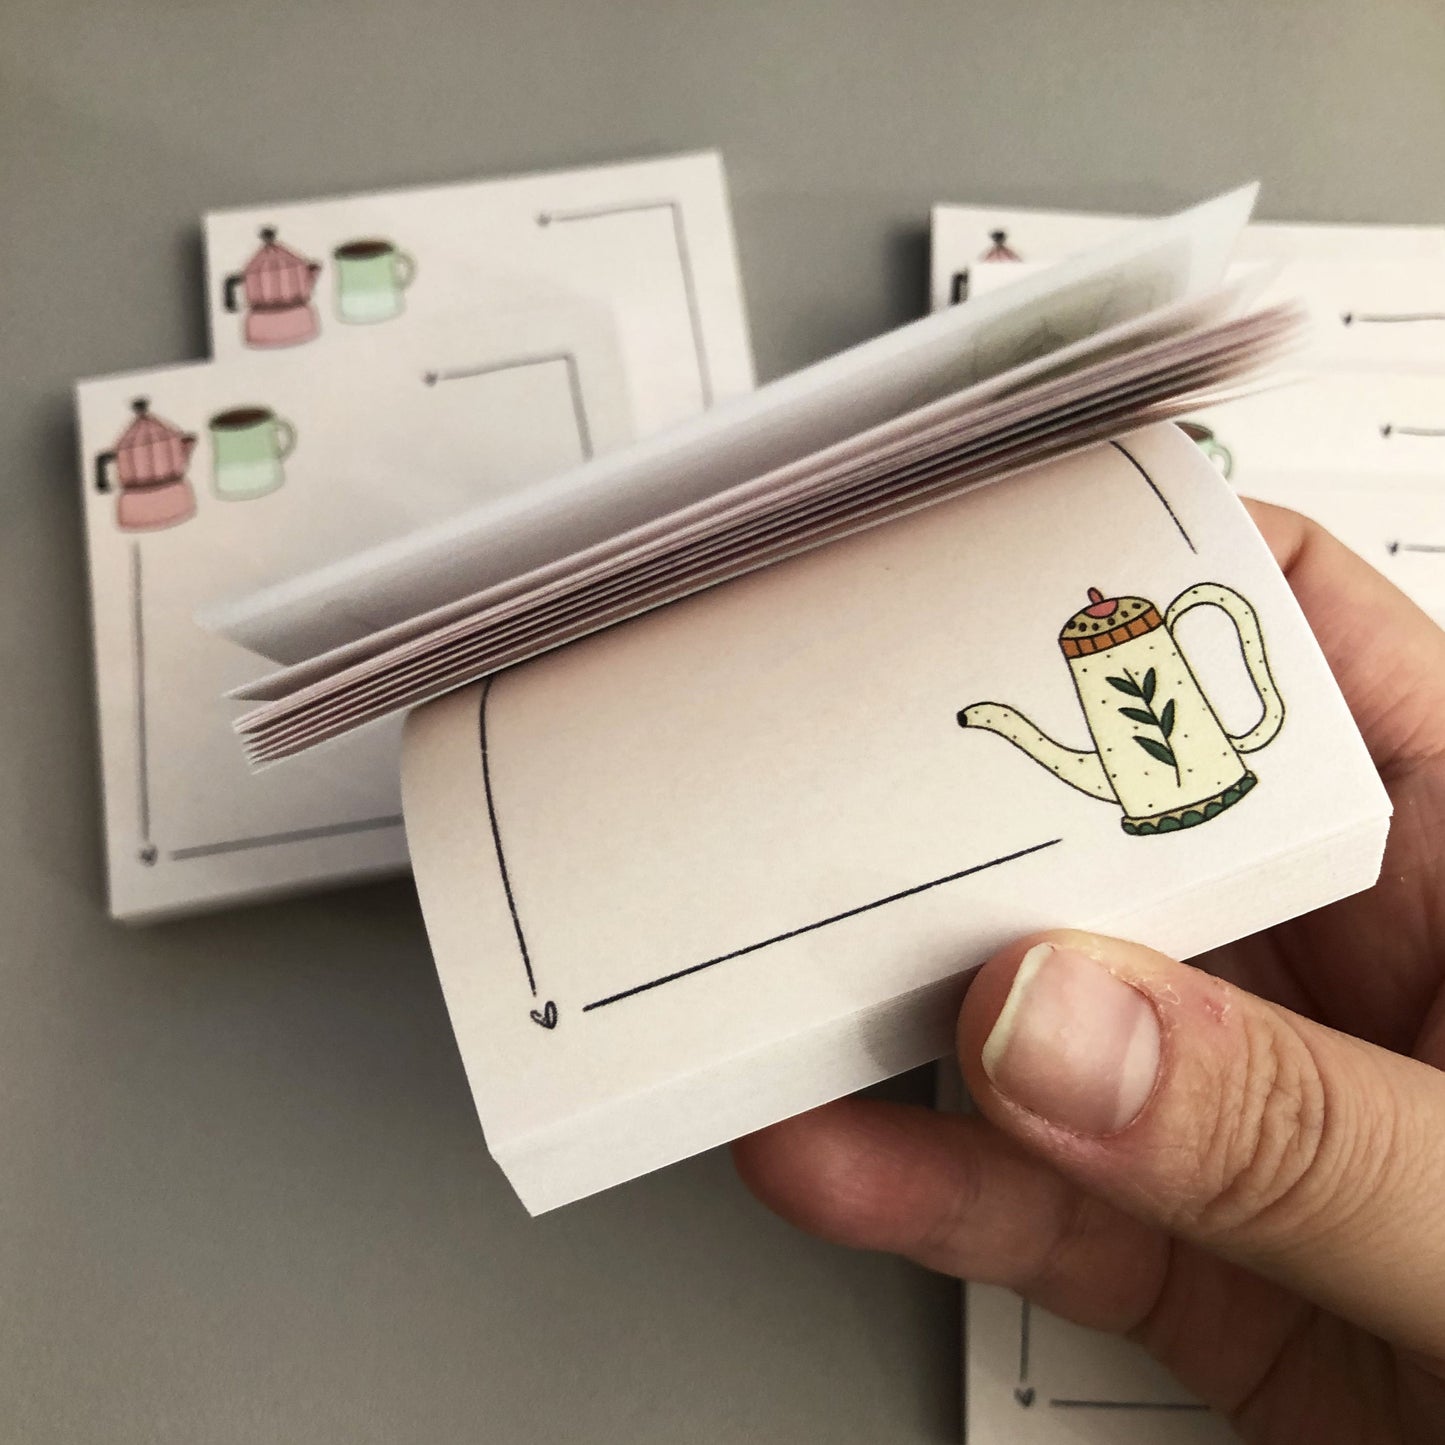 Coffee lover sticky notes